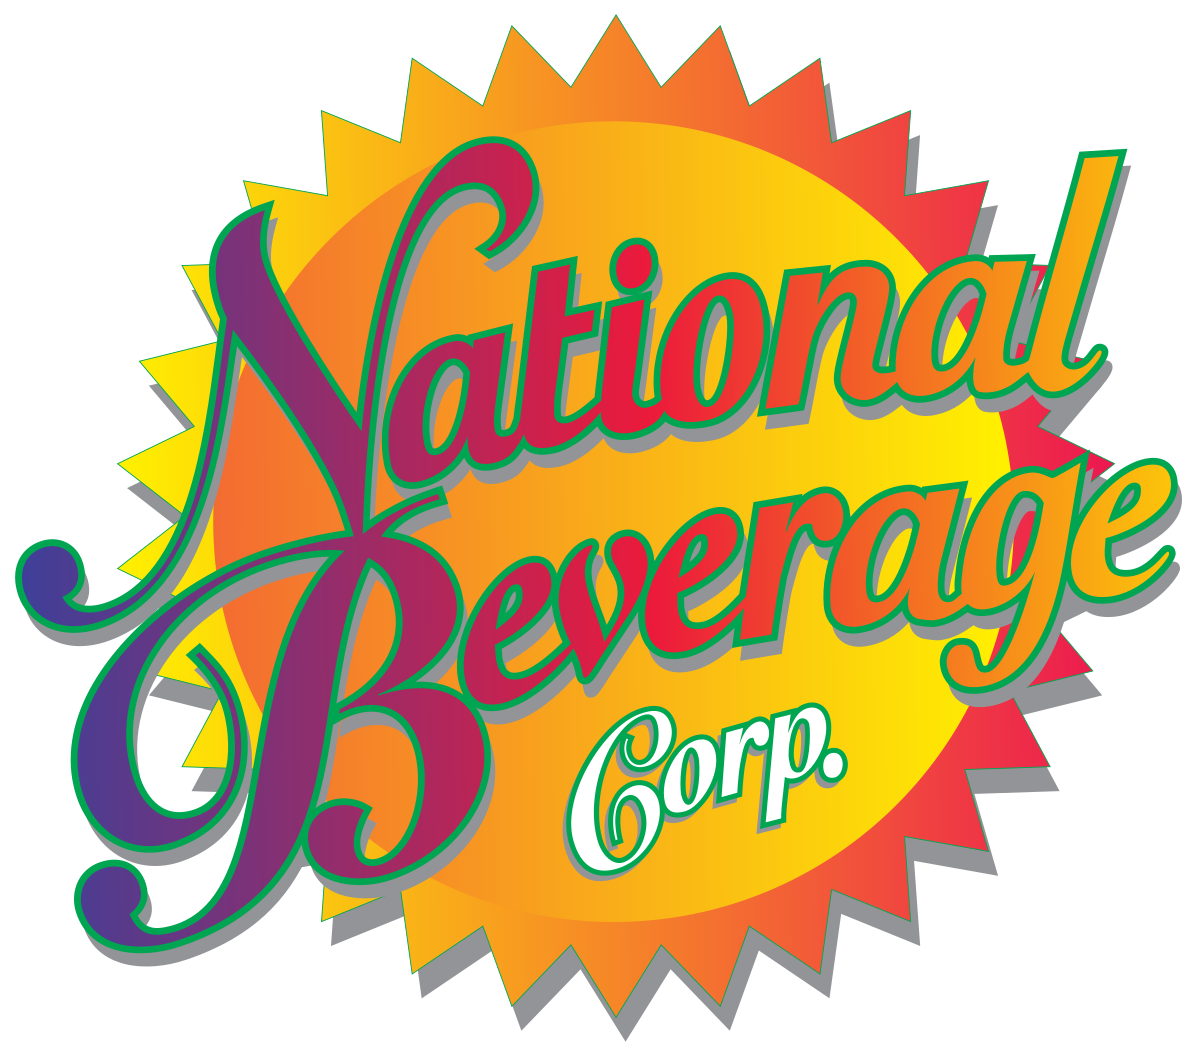 Home - National Beverage Corp.